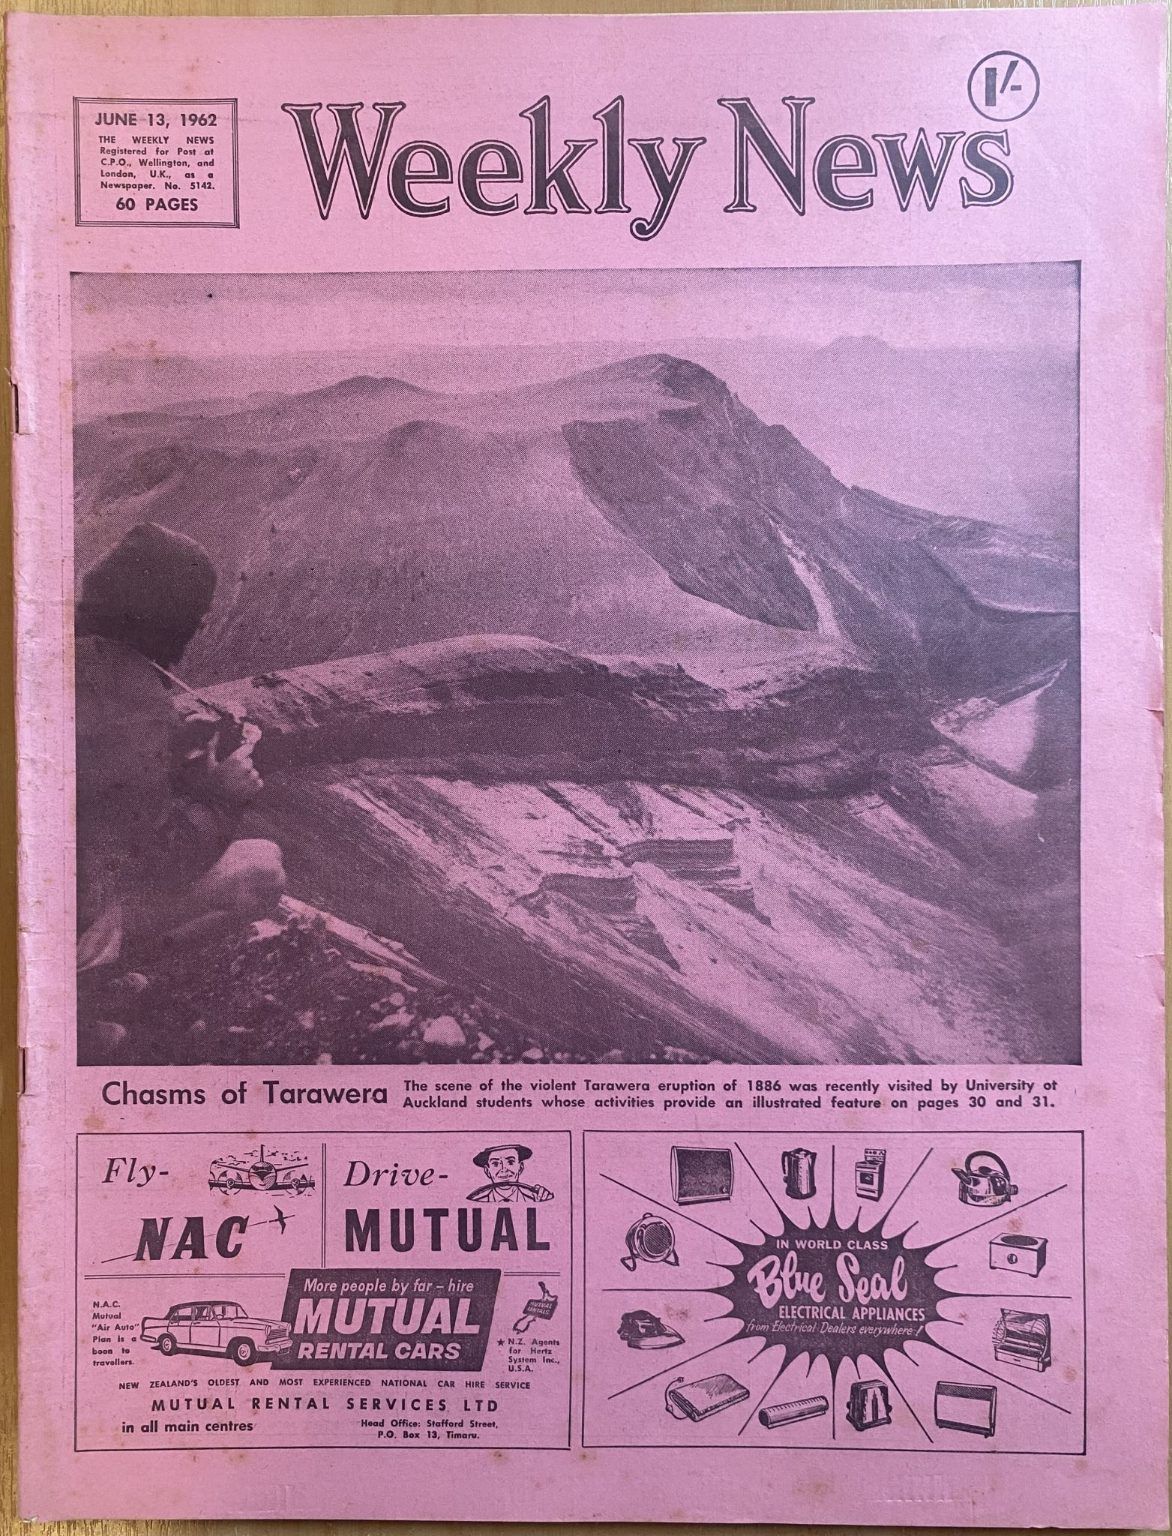 OLD NEWSPAPER: The Weekly News, No. 5142, 13 June 1962